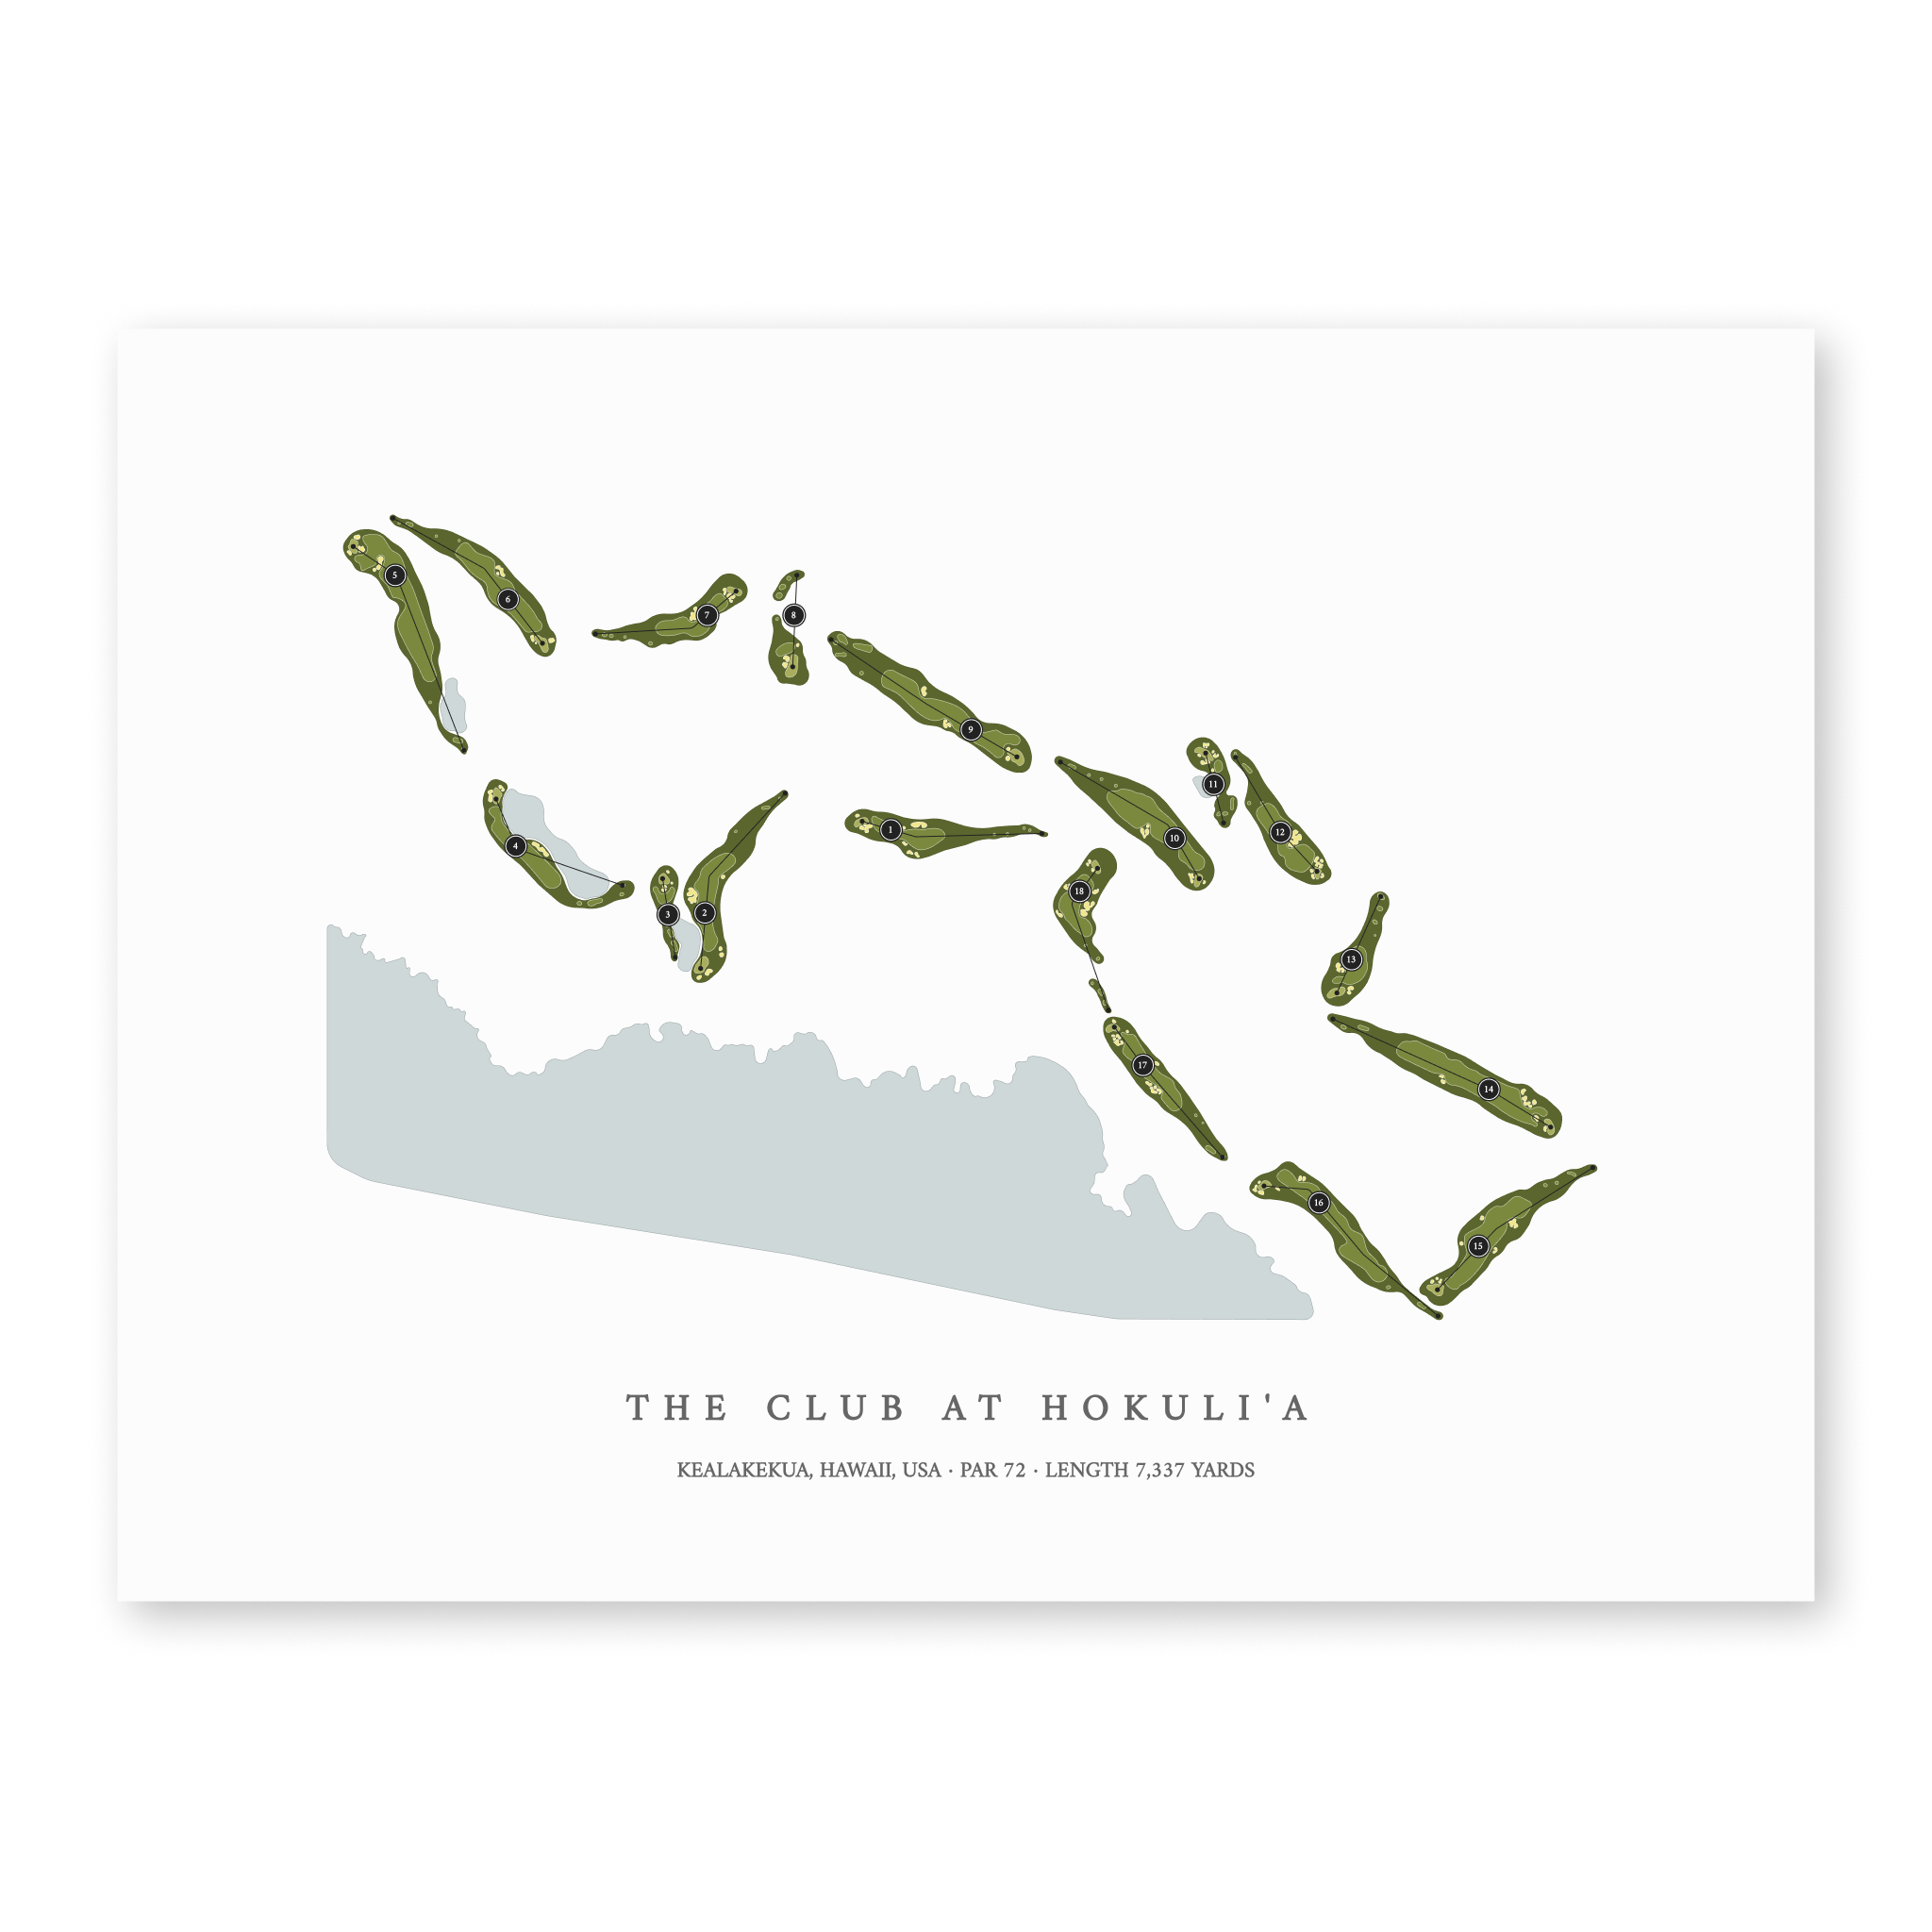 The Club At Hokuli'a | Golf Course Map | Unframed With Hole Numbers #hole numbers_yes